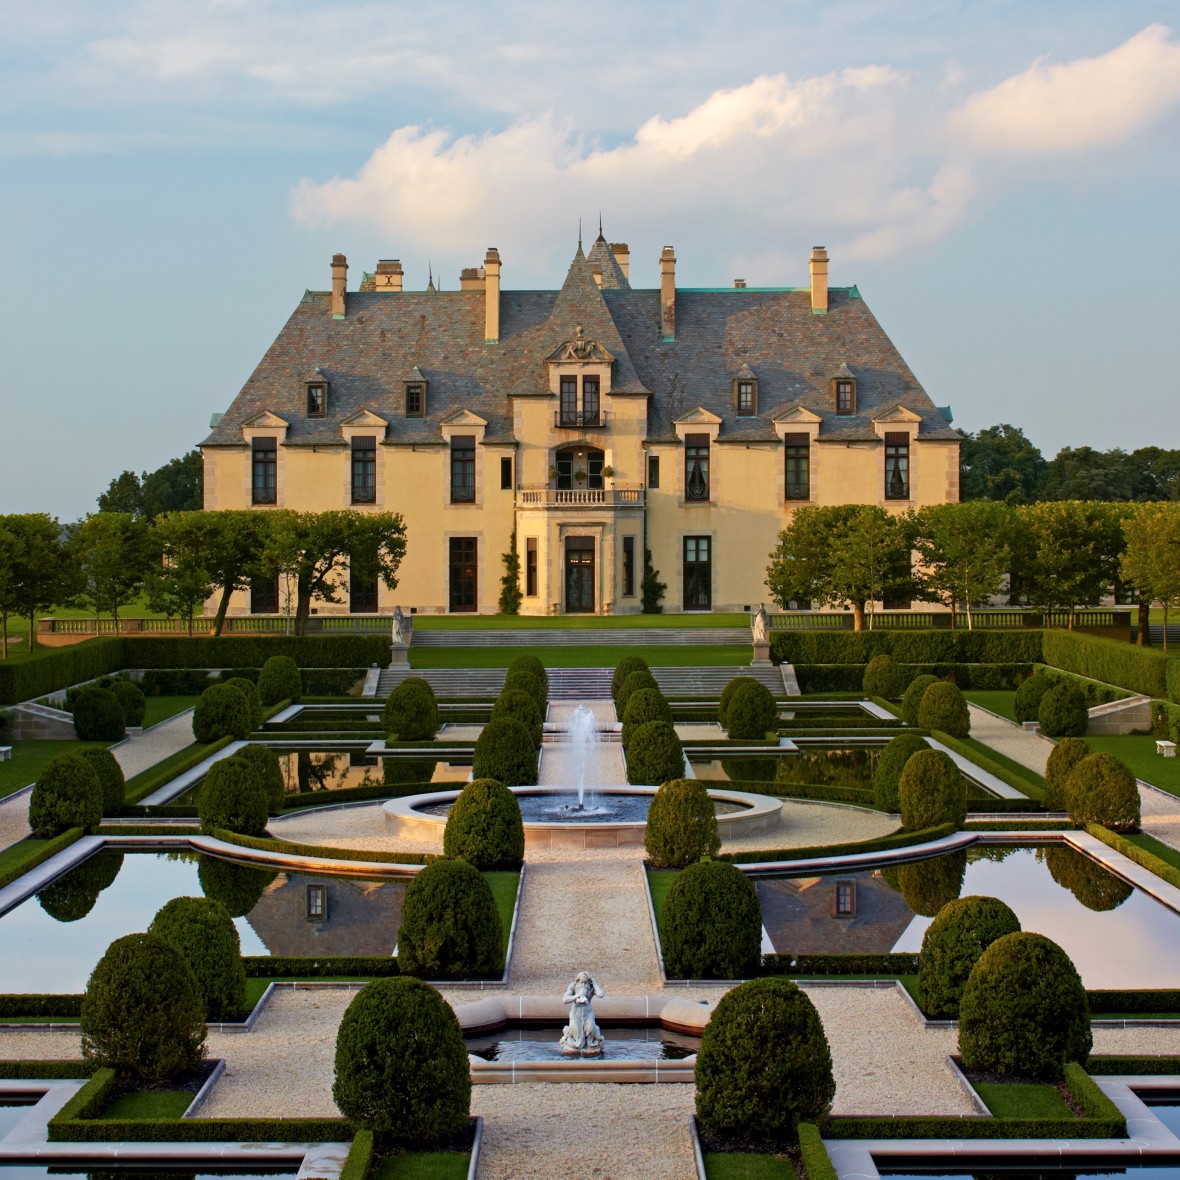 Oheka Castle with its formal gardens in foreground